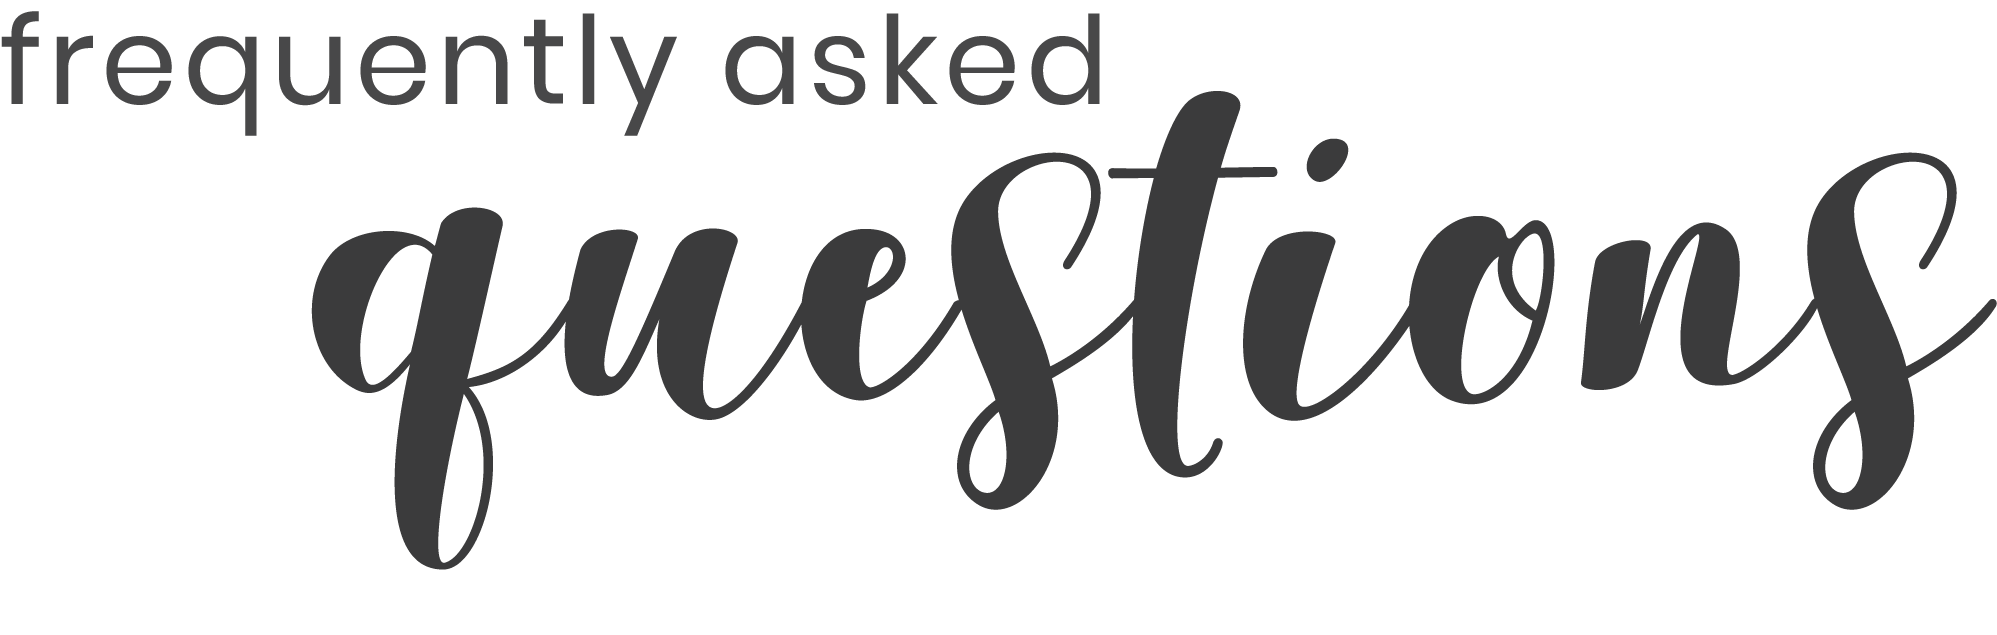 The words "Frequently Asked Questions" written in a scripted font